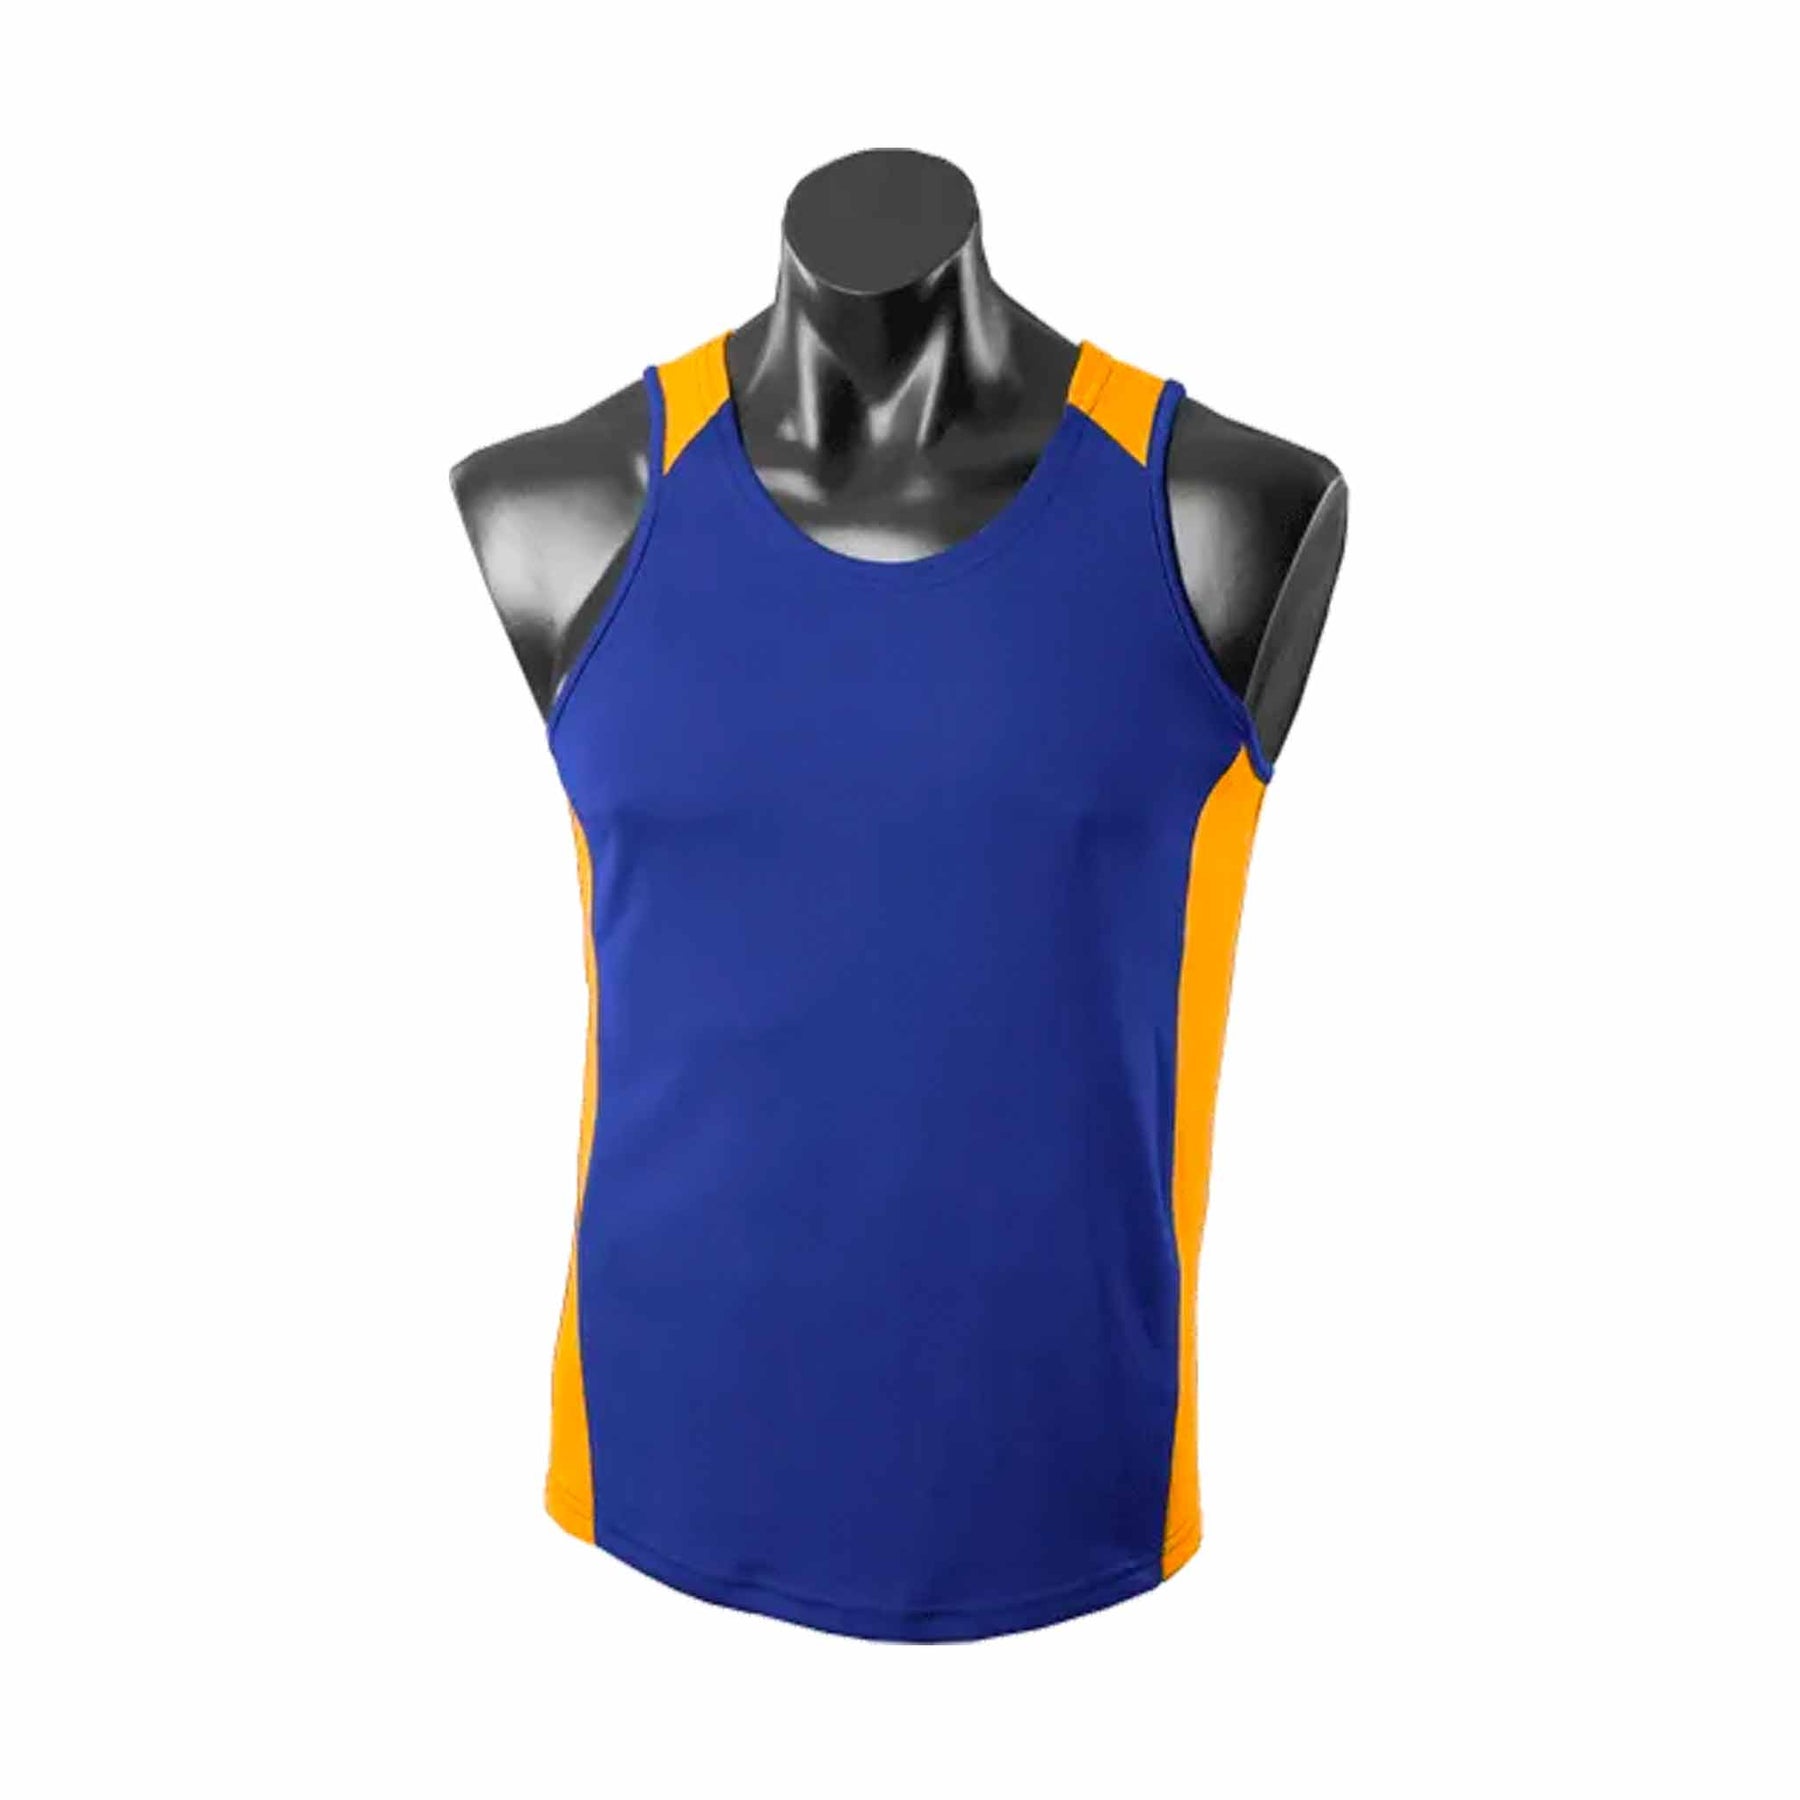 aussie pacific mens premier singlets in royal gold